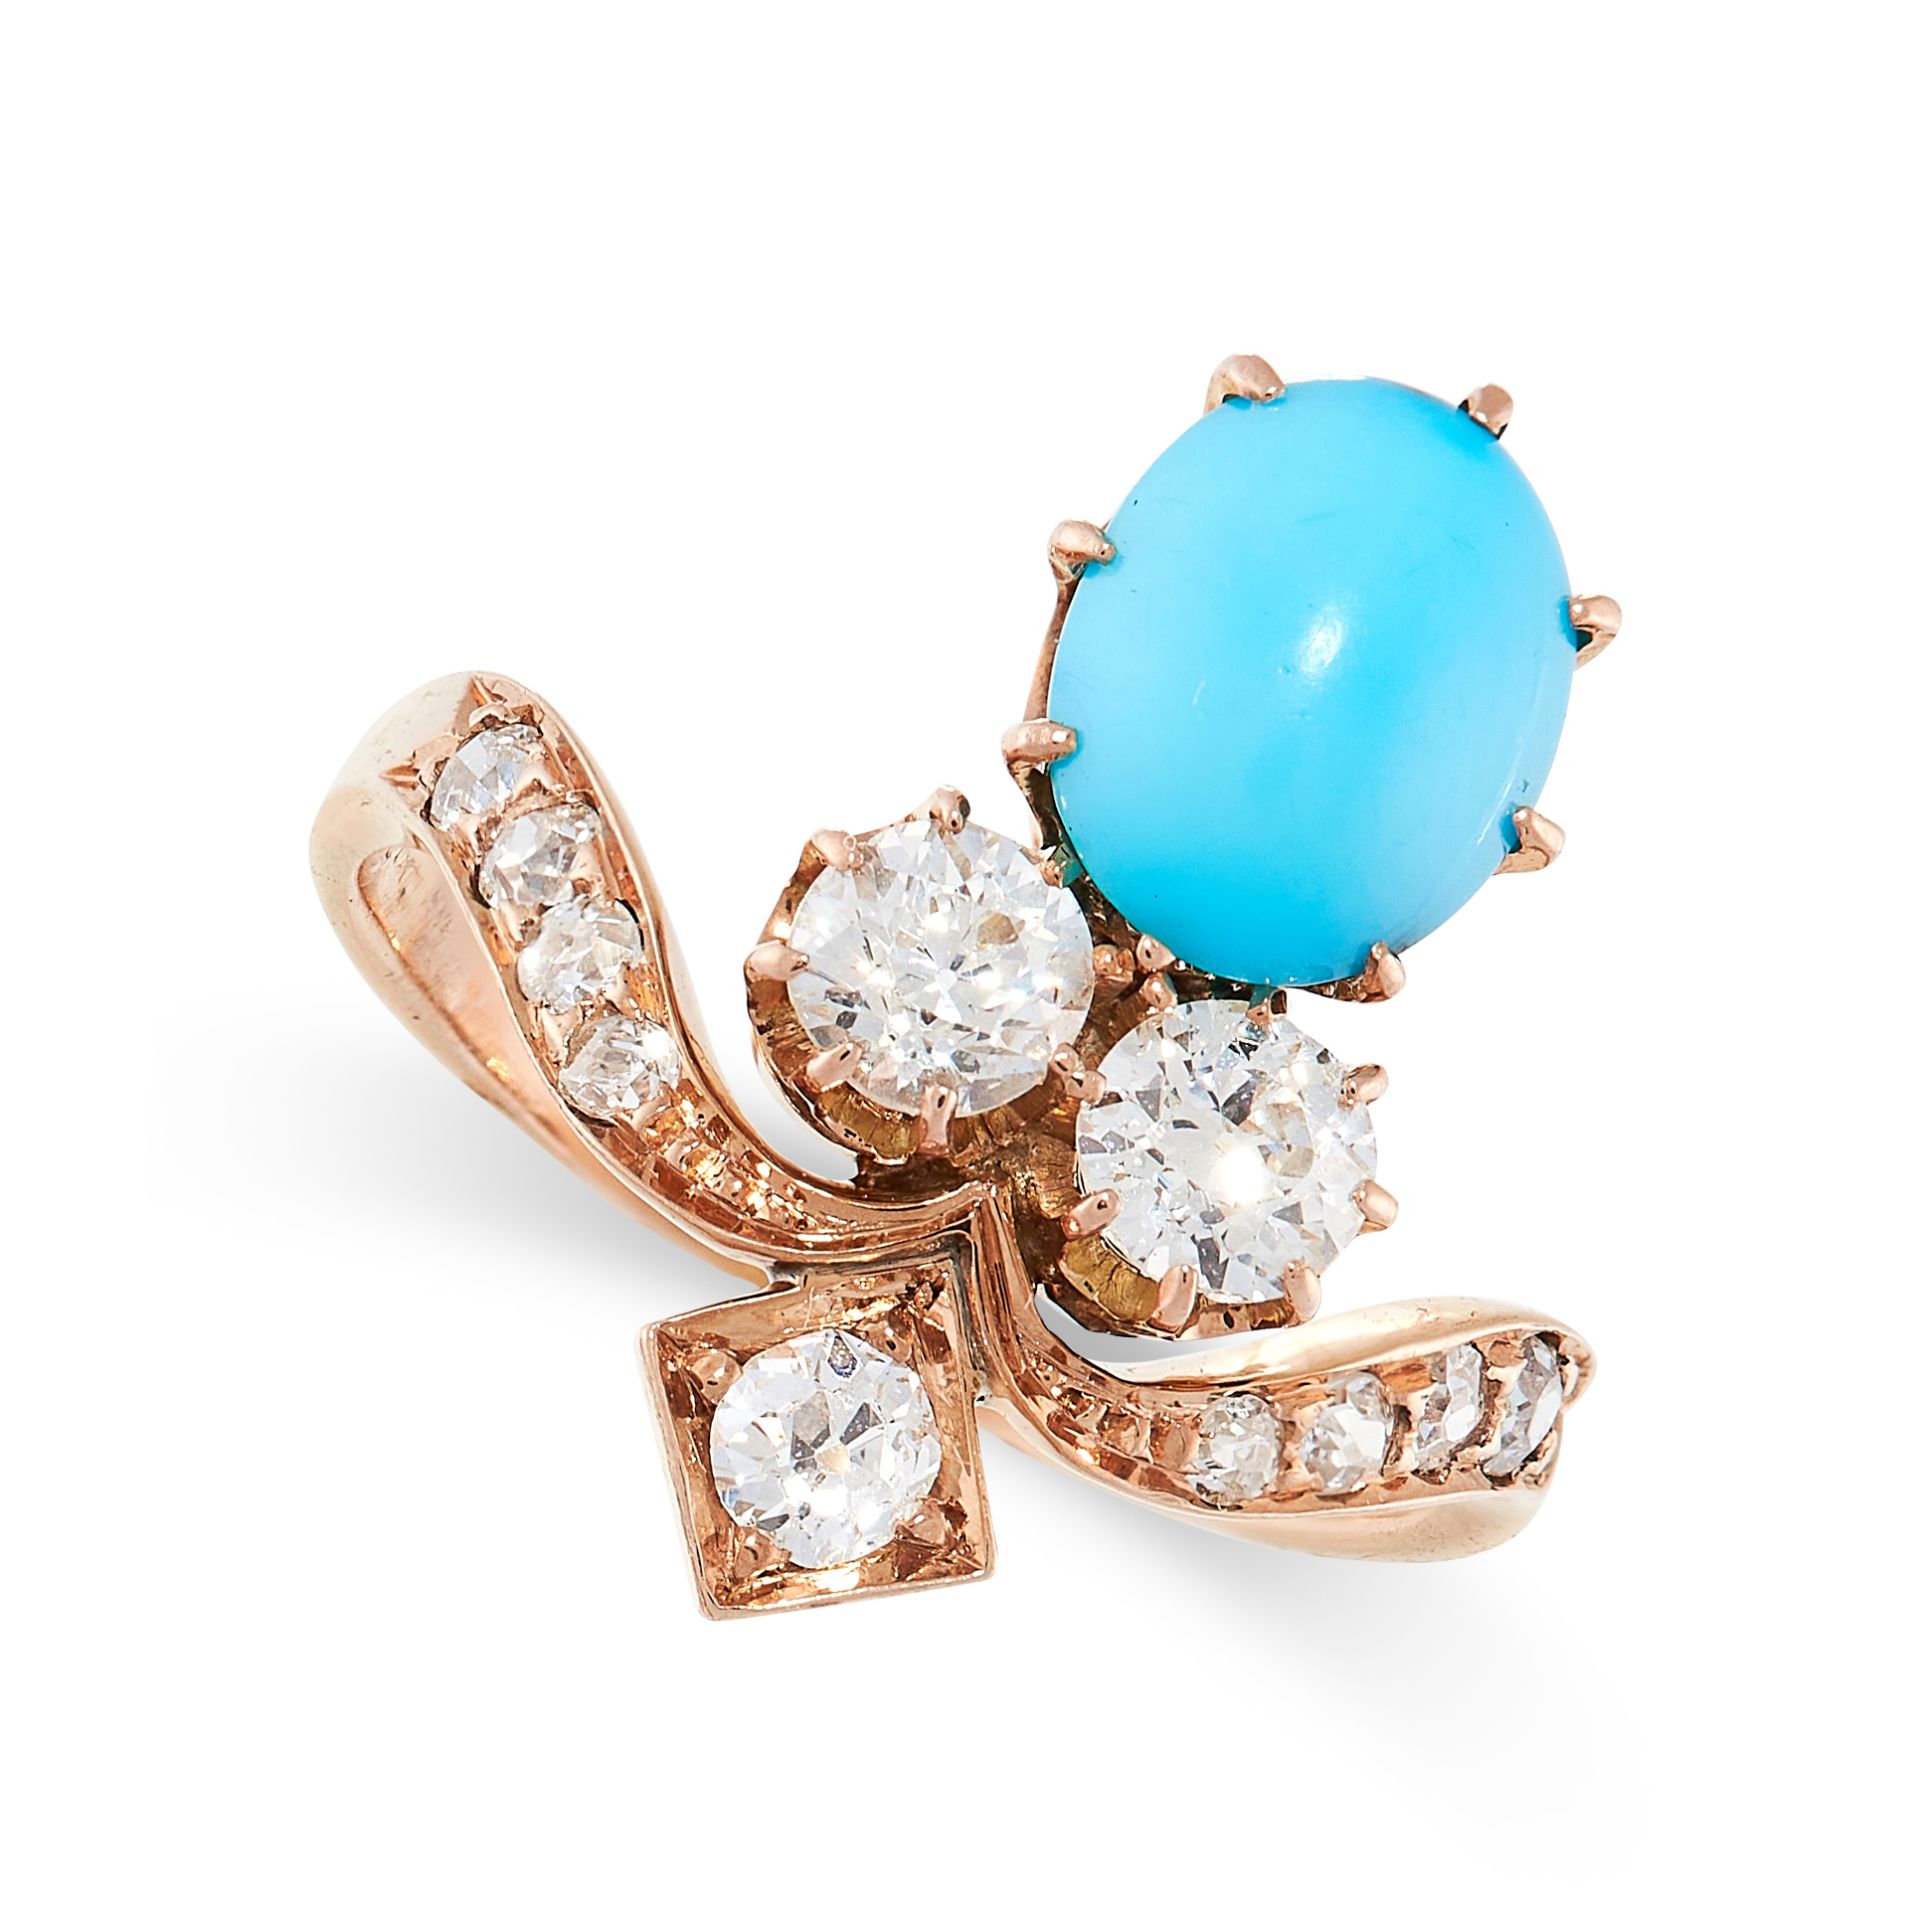 AN ANTIQUE TURQUOISE AND DIAMOND TIARA RING in yellow gold, the stylised band set with old cut